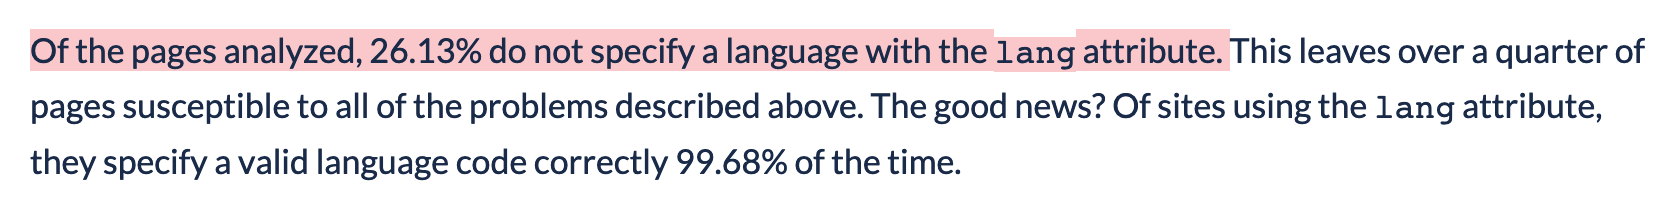 Paragraph of the article: Of the pages analyzed, 26.13% do not specify a language with the lang attribute.